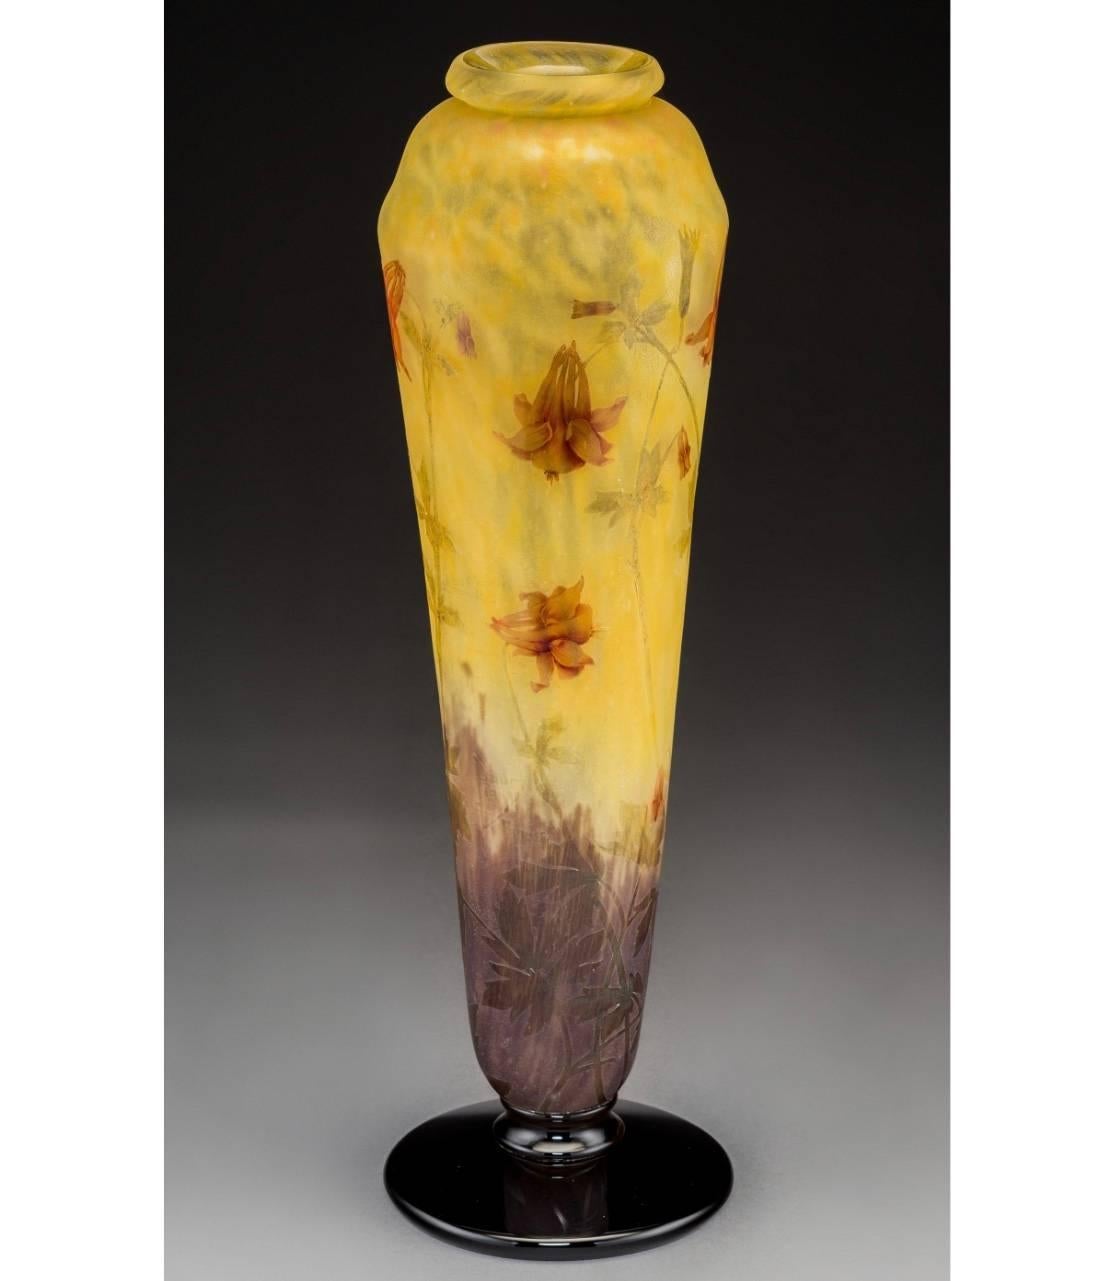 Large enameled glass columbine flower pedestaled vase by Daum nancy. Variegated yellow glass with enameled red flowers, circa 1900. 

Signed in cameo daum nancy with cross of lorraine 

Height: 18-3/4 Inches.

Provenance: Heritage Auctions, Sale